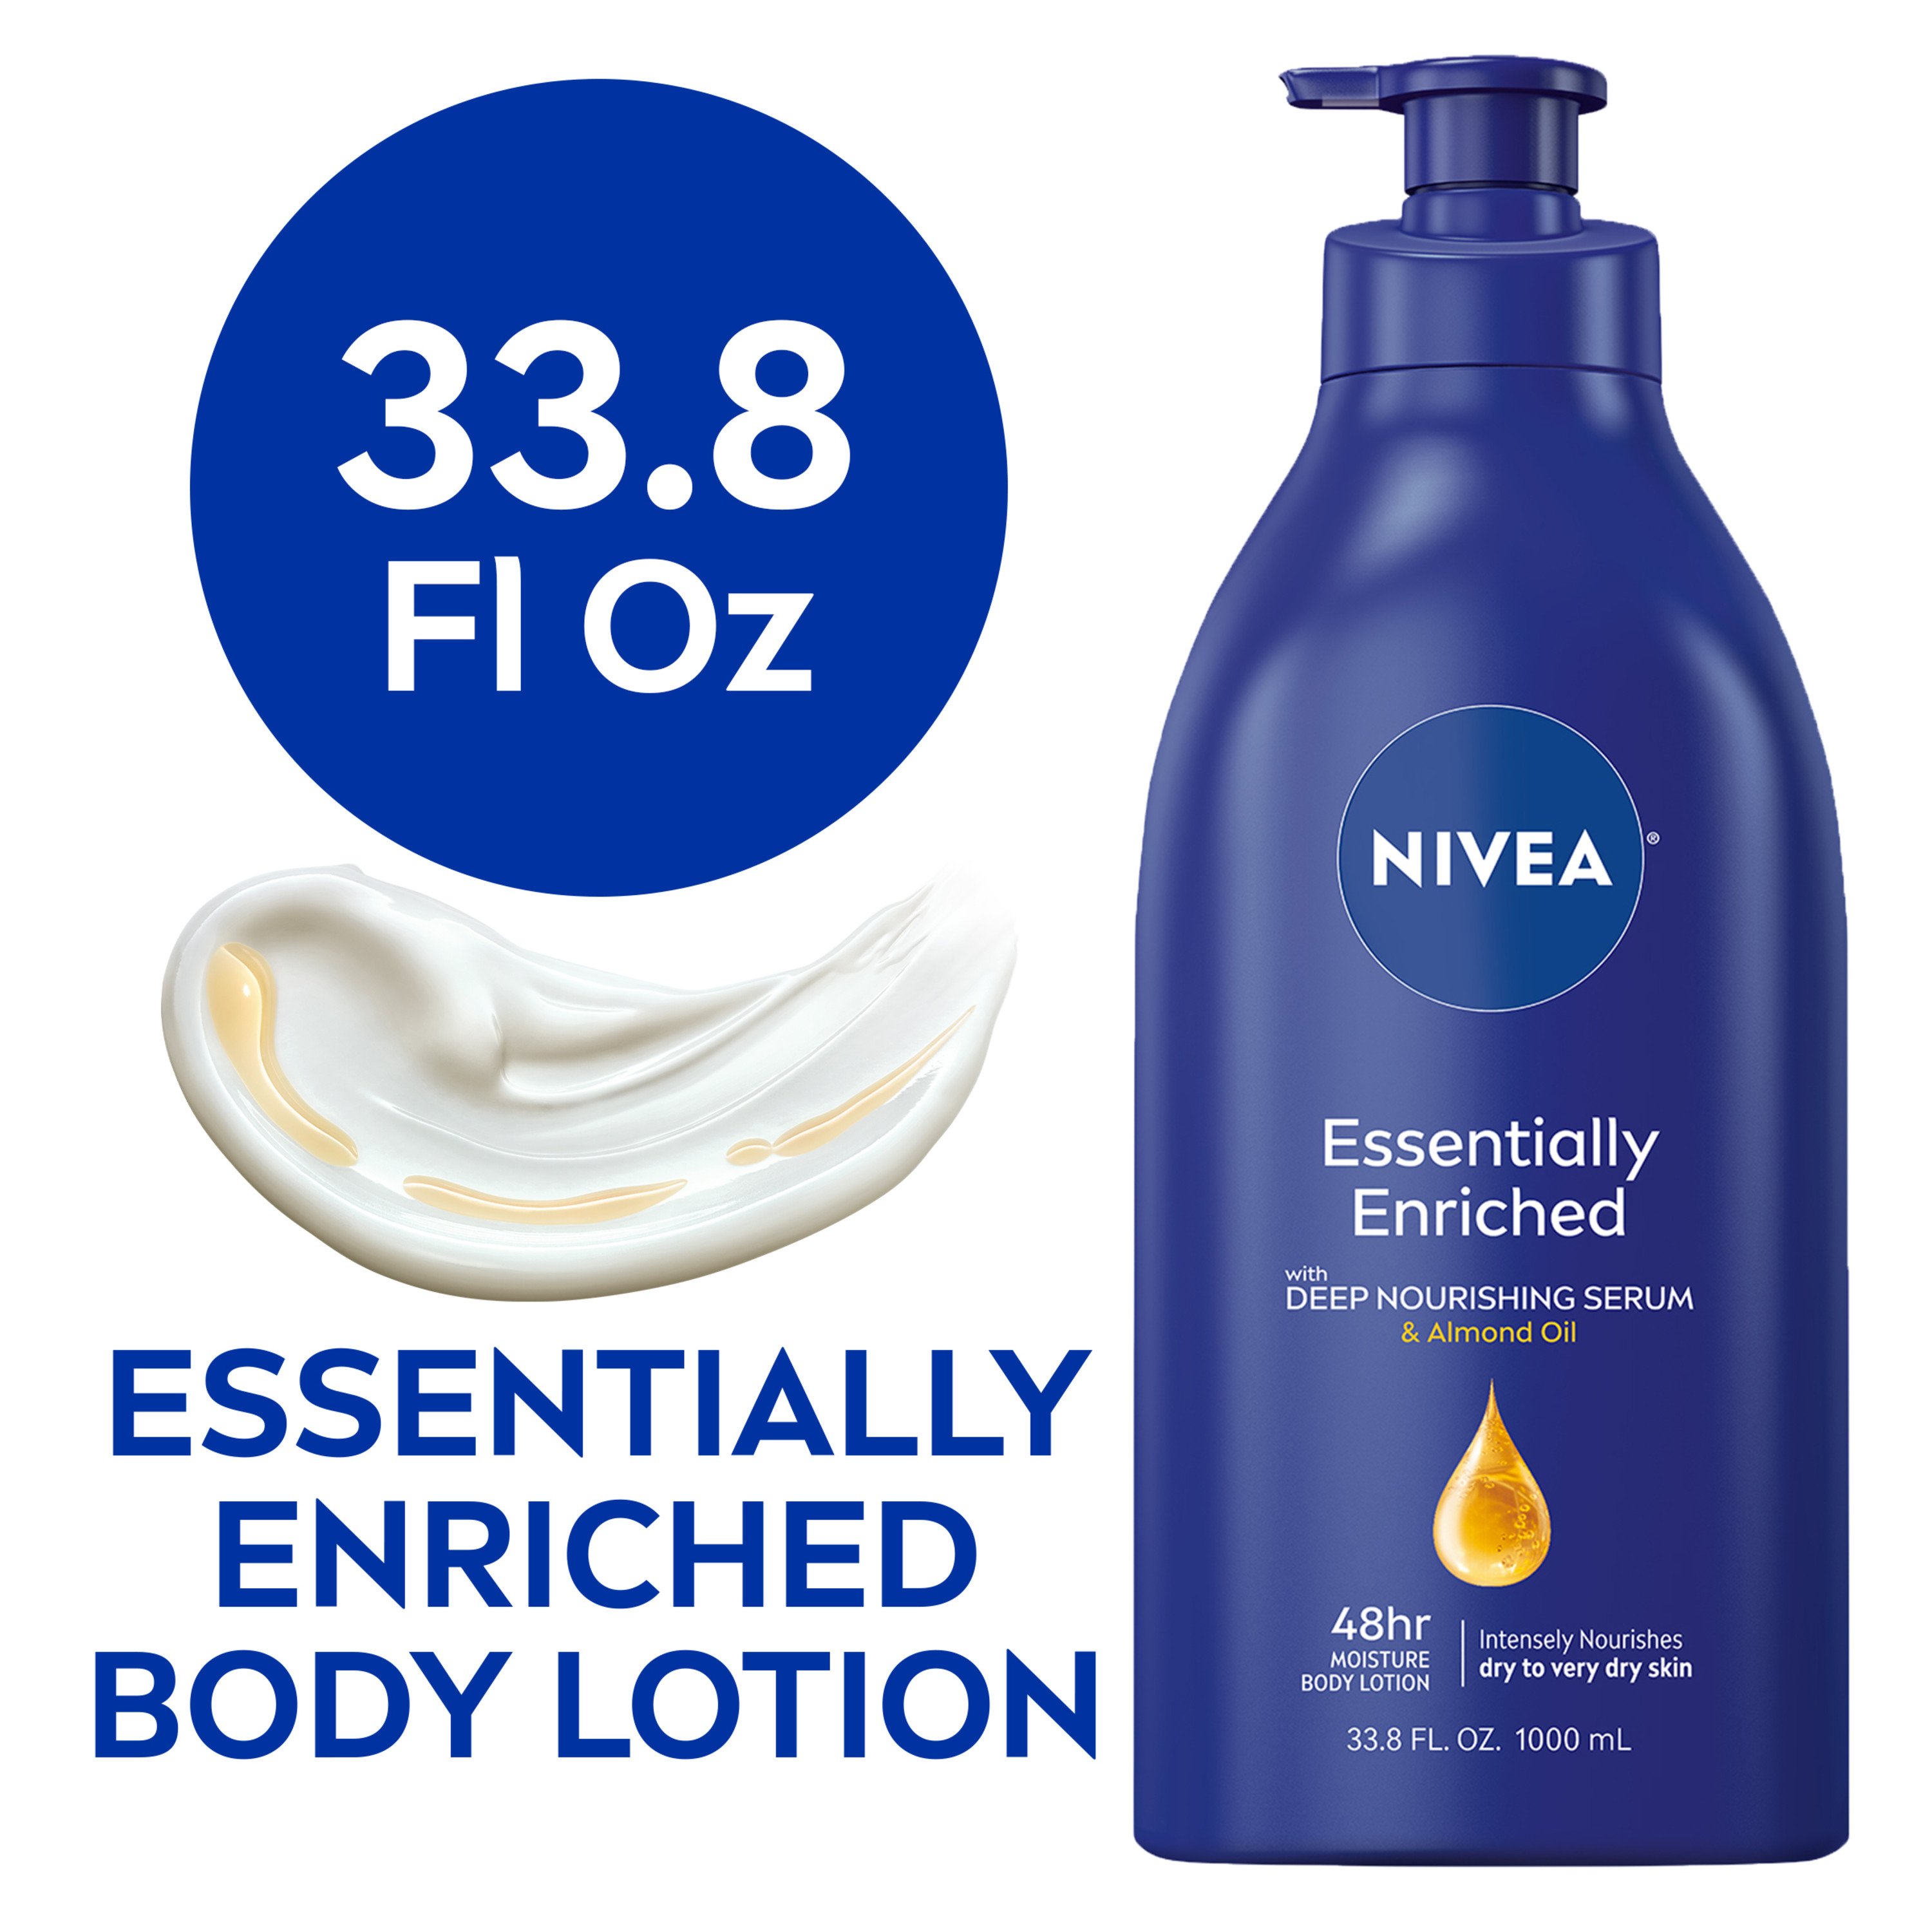 NIVEA Essentially Enriched Body Lotion for Dry Skin, 33.8 Fl Oz Pump Bottle - image 1 of 10